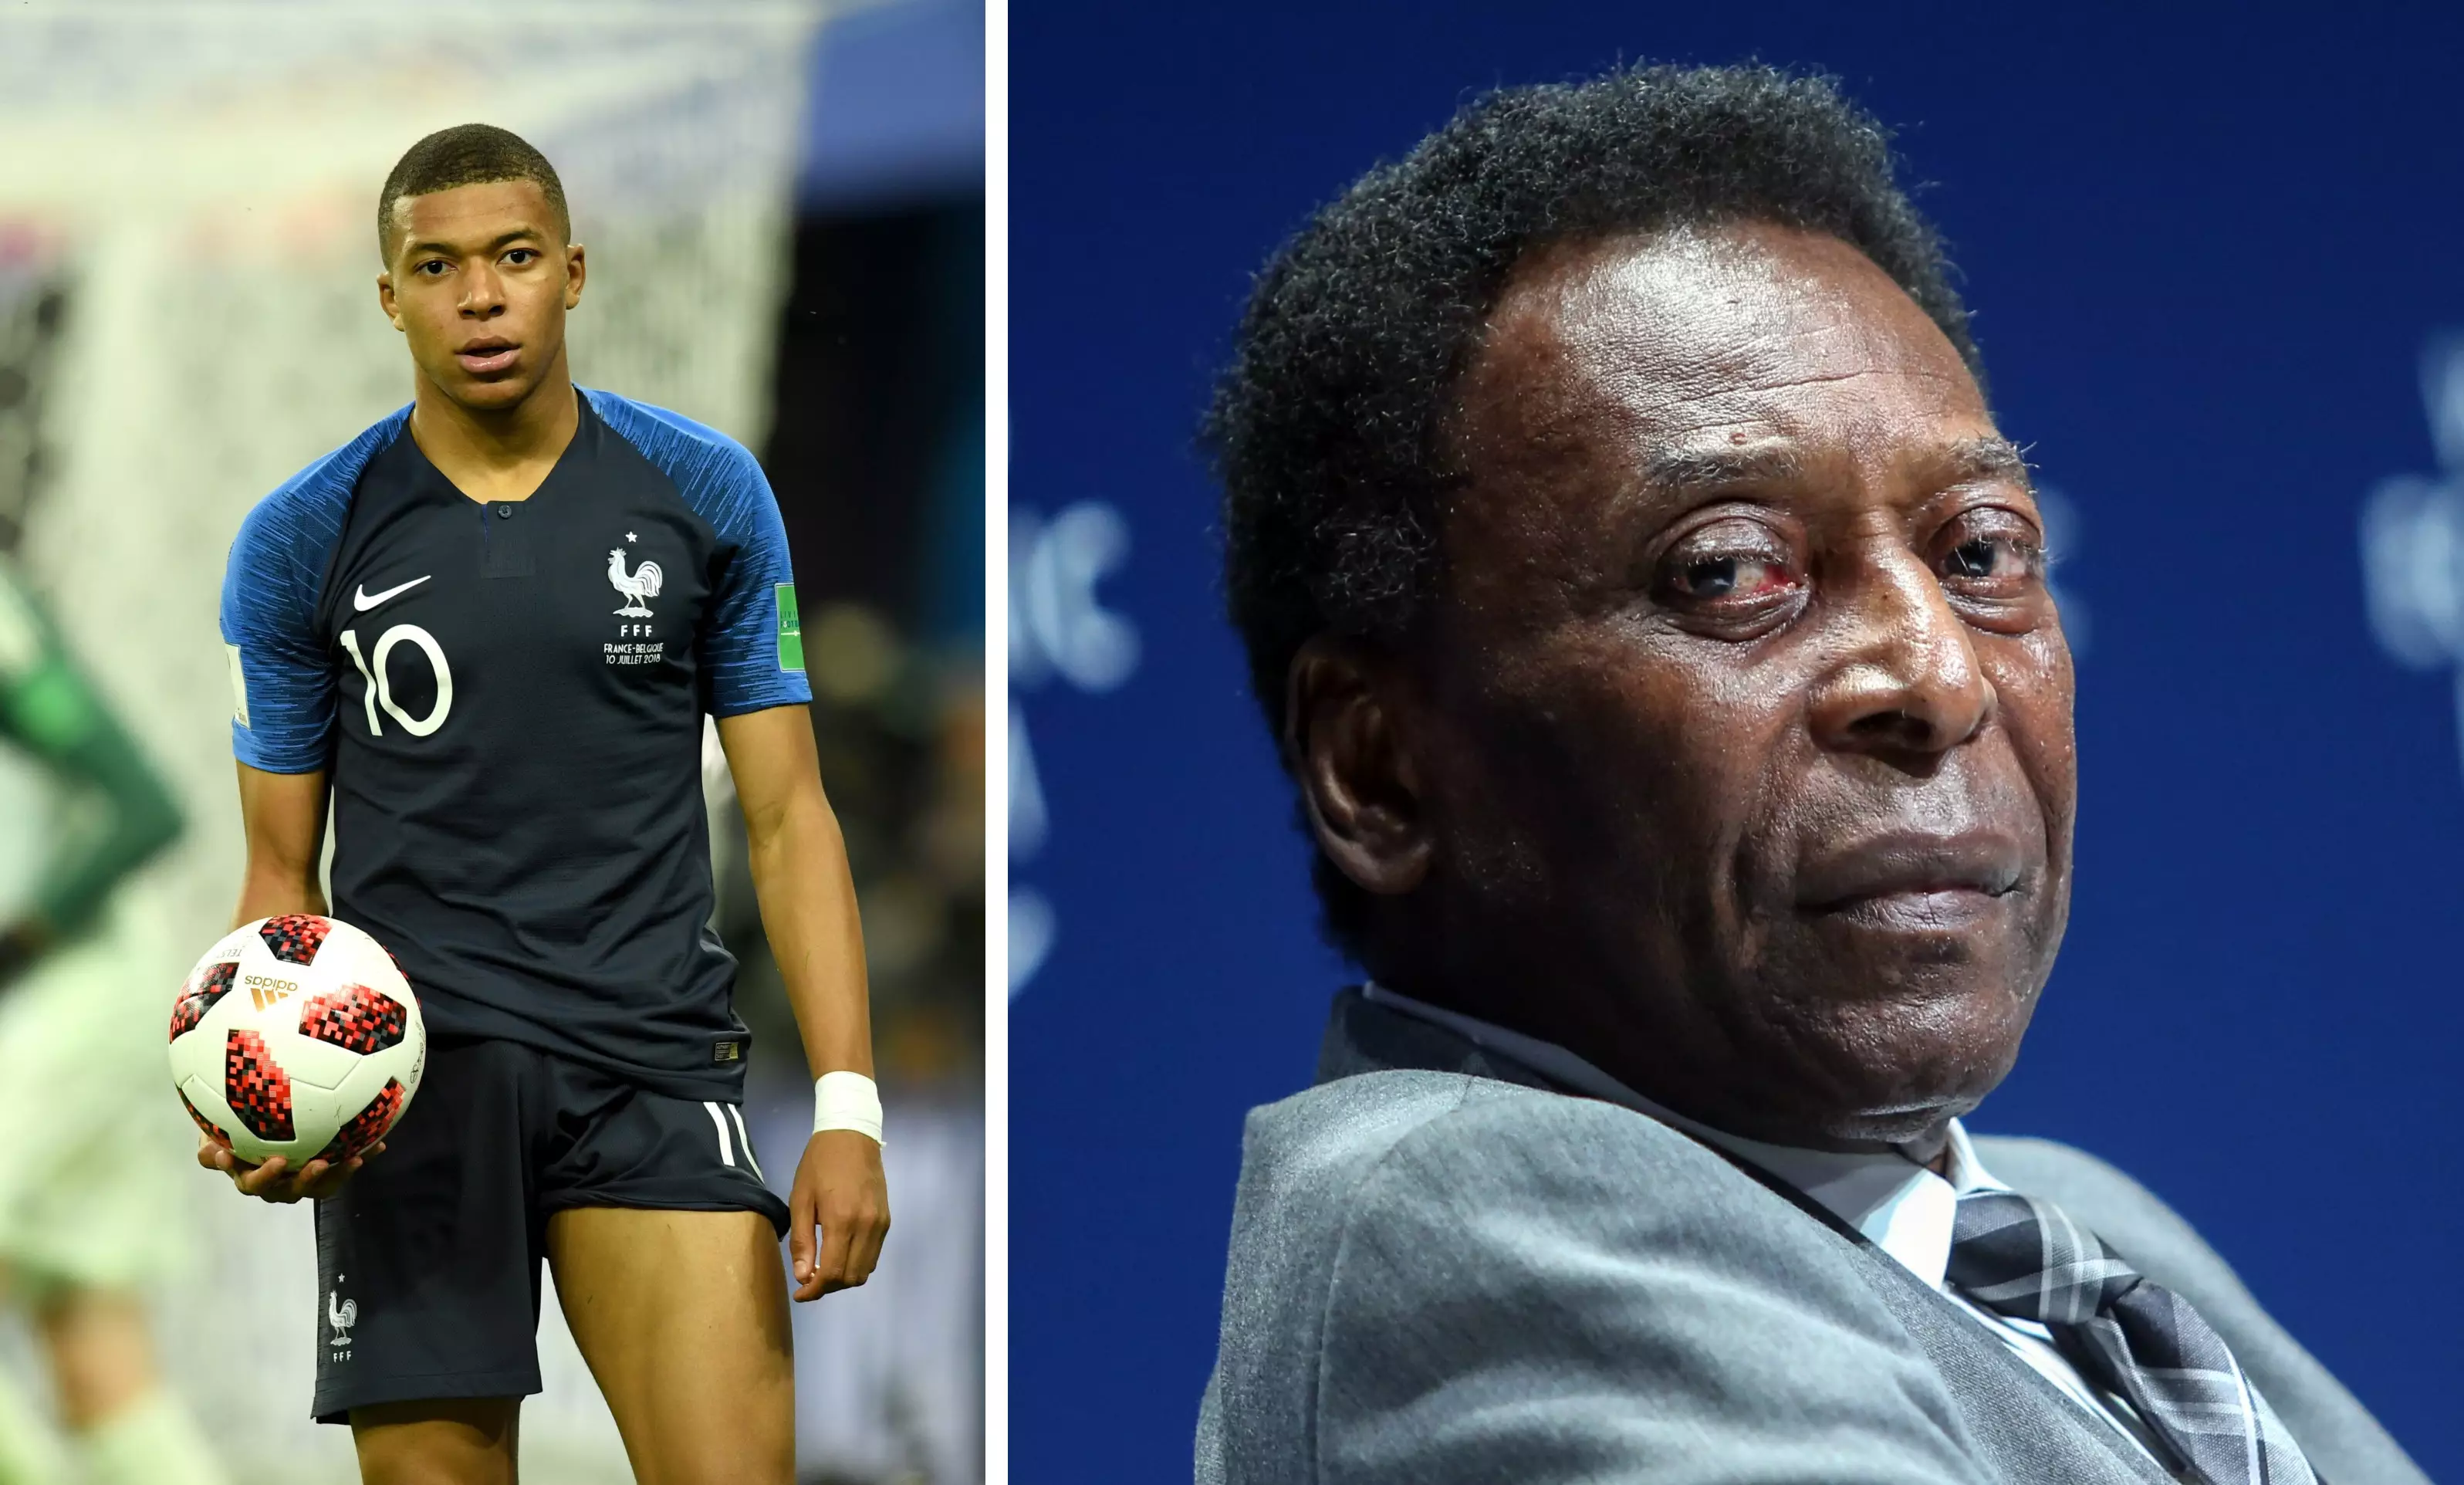 Kylian Mbappé Shows Off His Spicy Gift From Brazil Legend Pelé